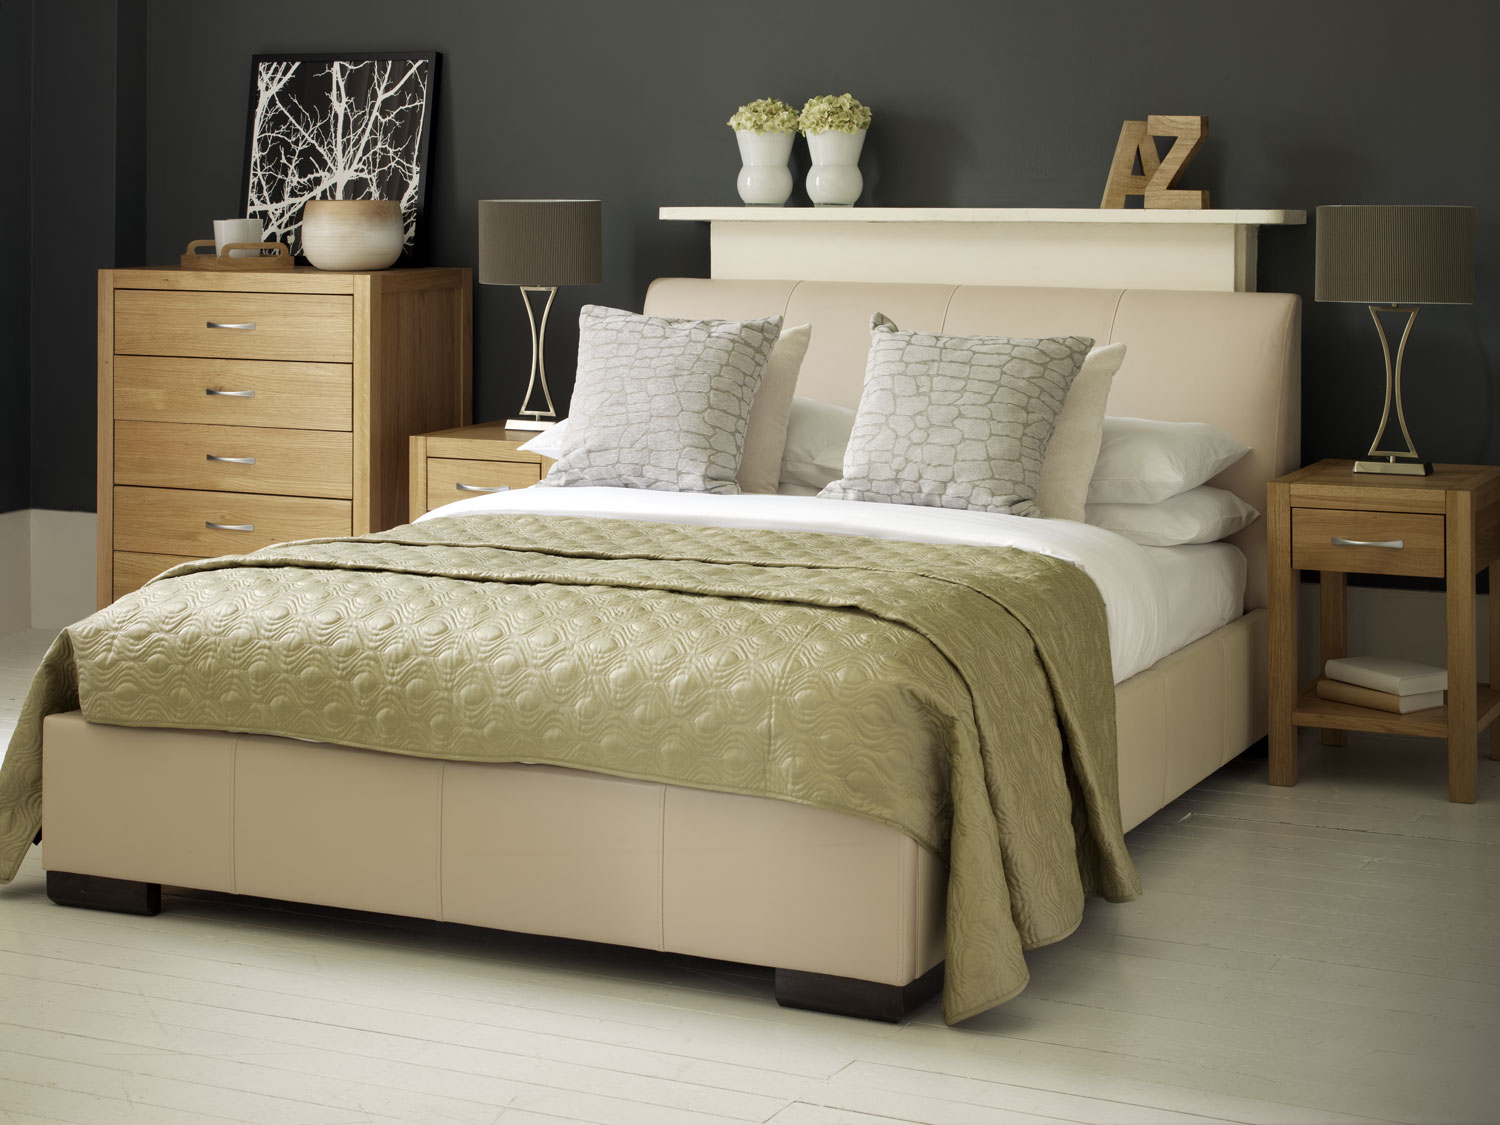 mattresses rated by cort rental furniture